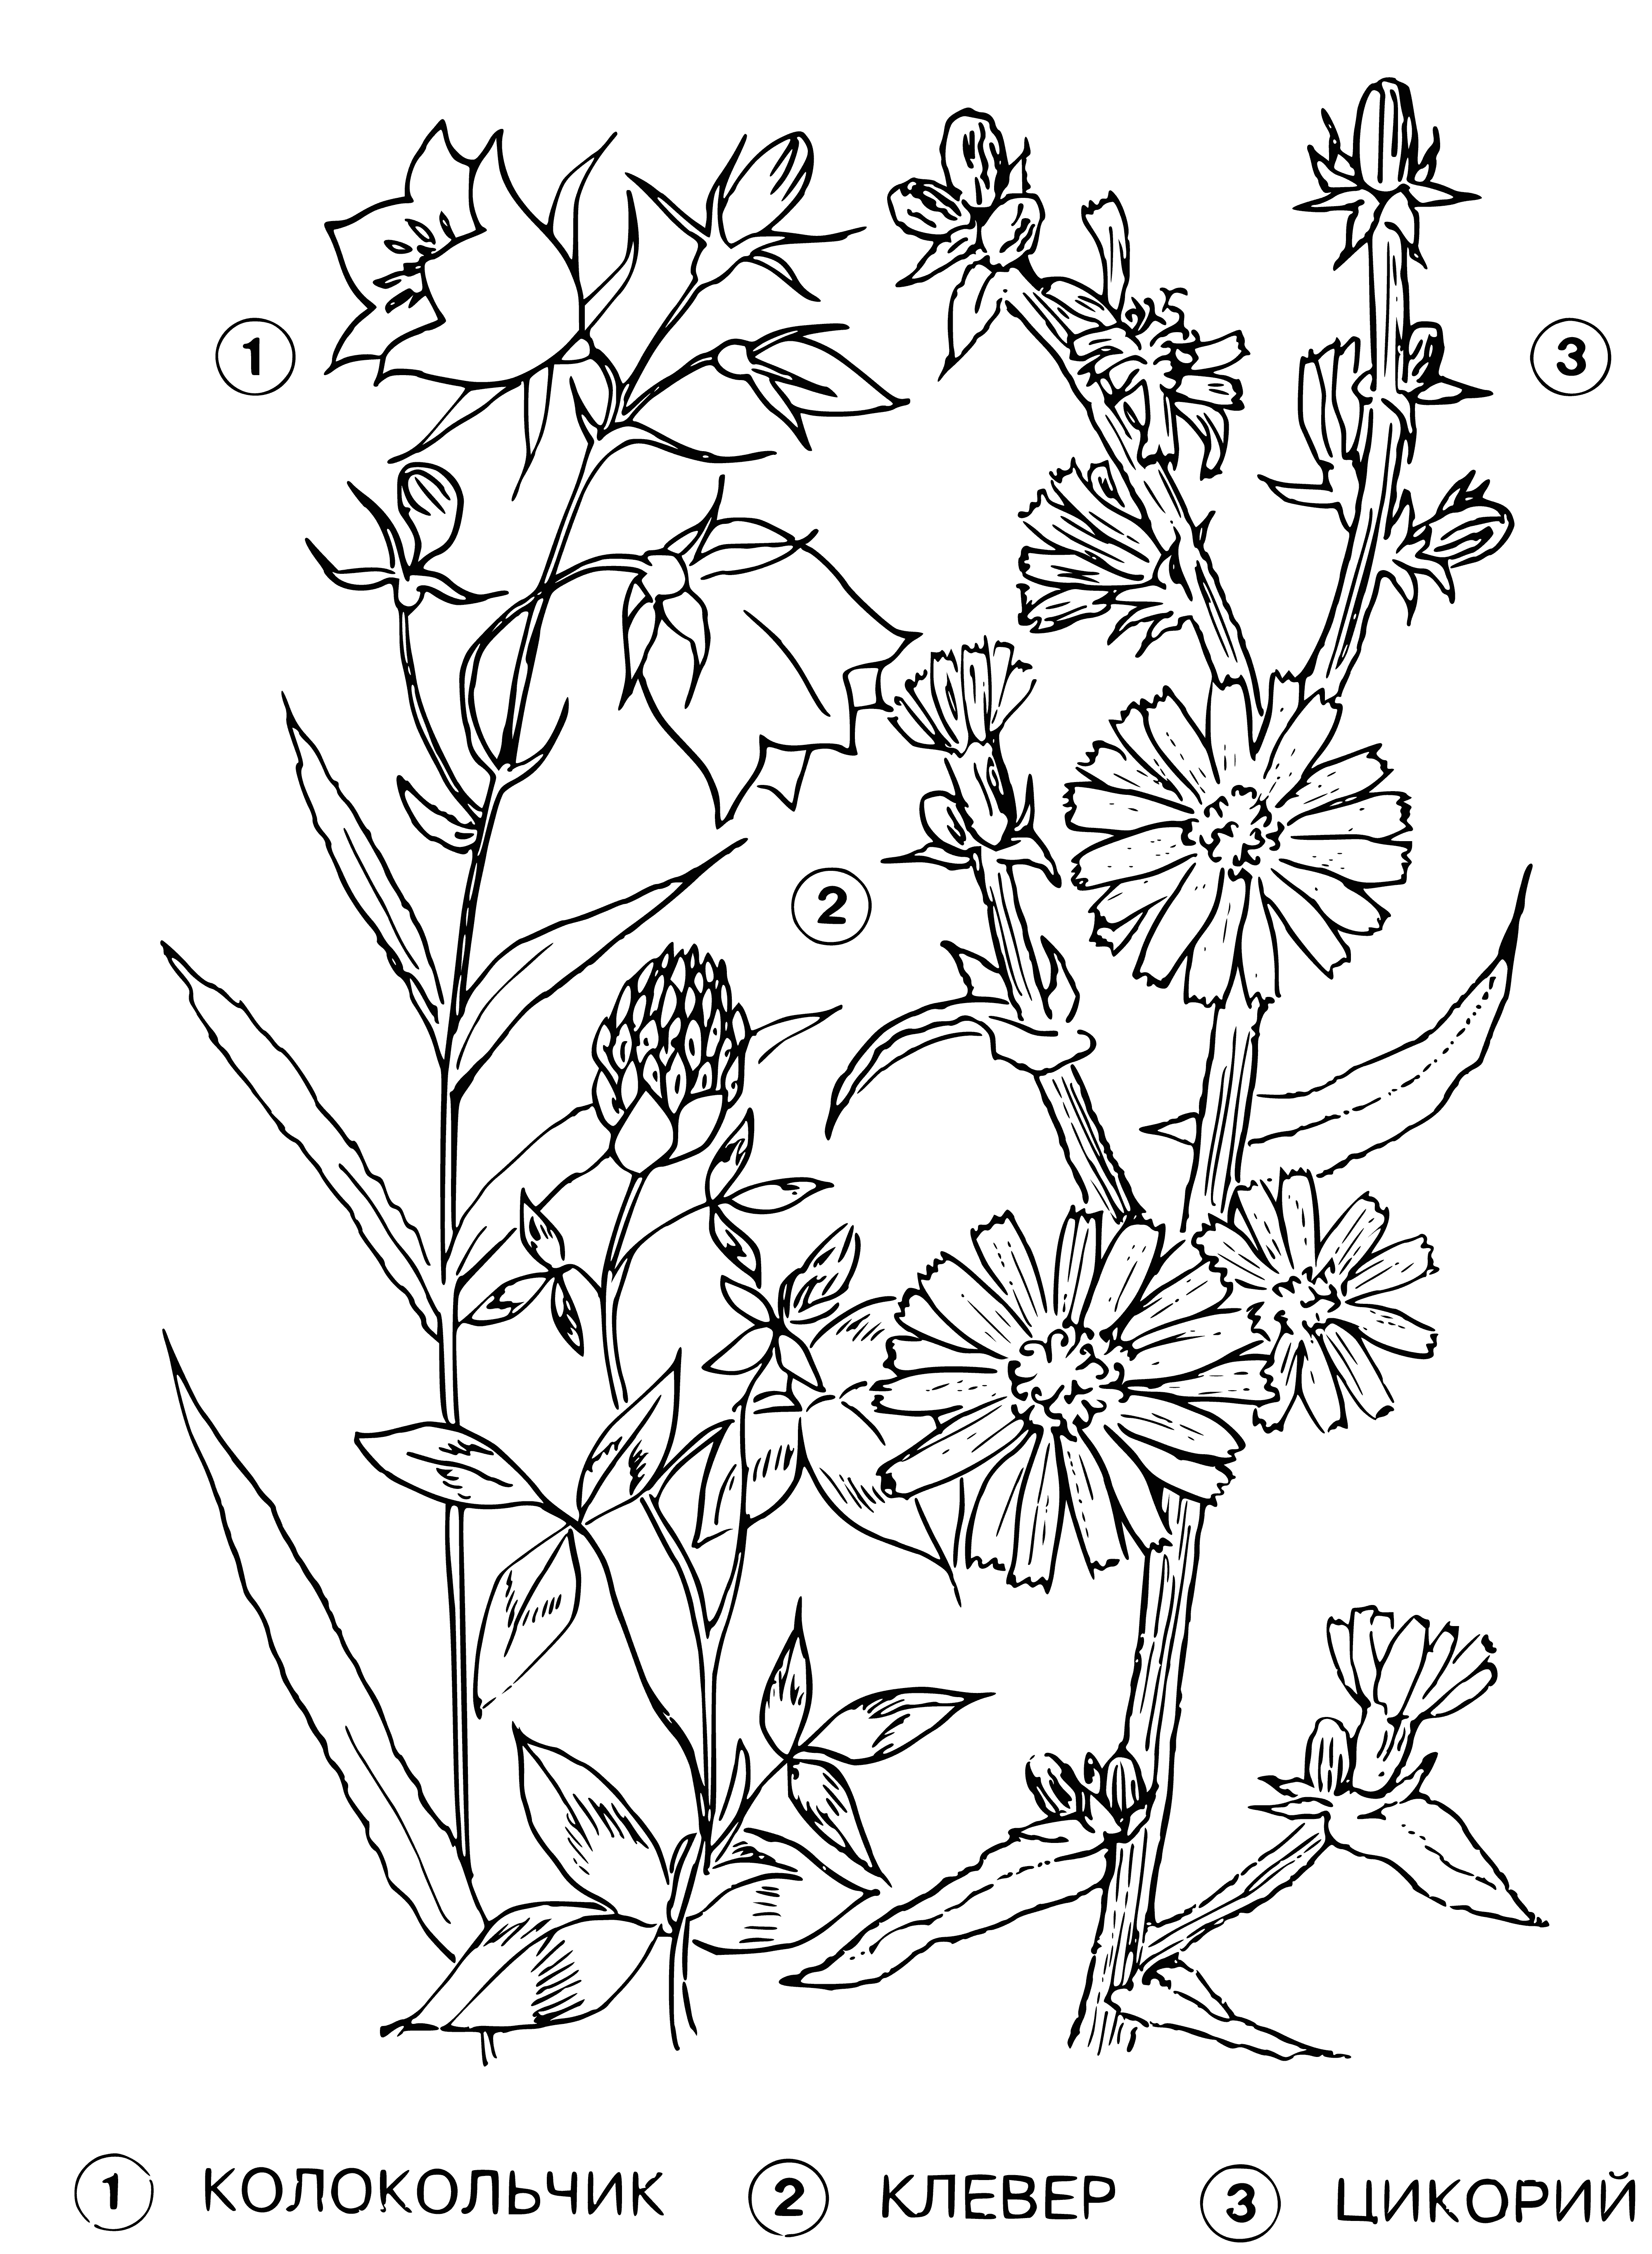 Bell, clover and chicory coloring page